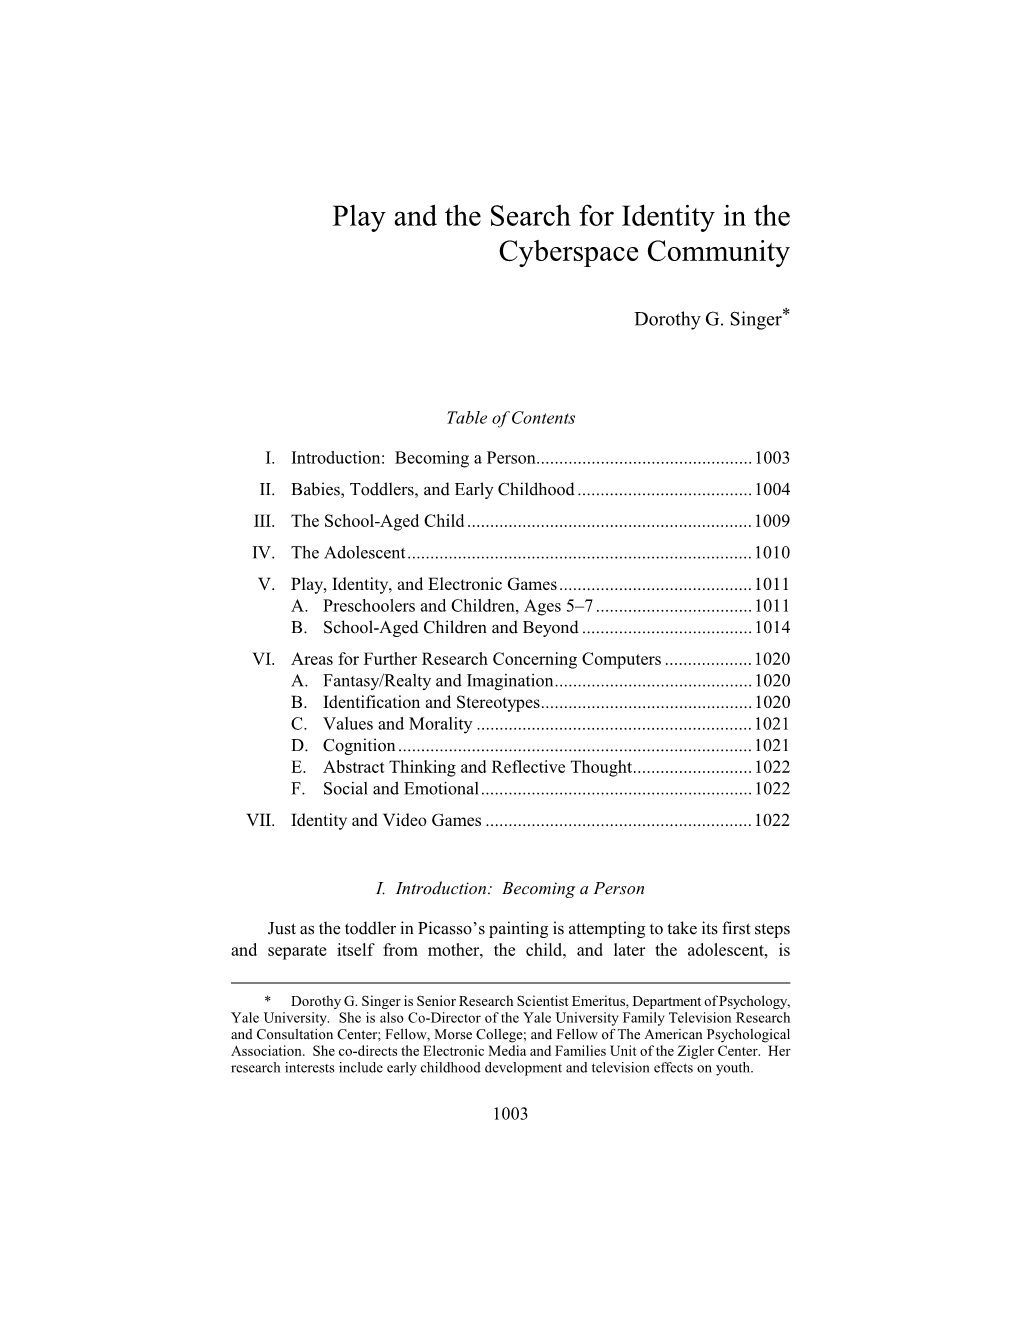 Play and the Search for Identity in the Cyberspace Community